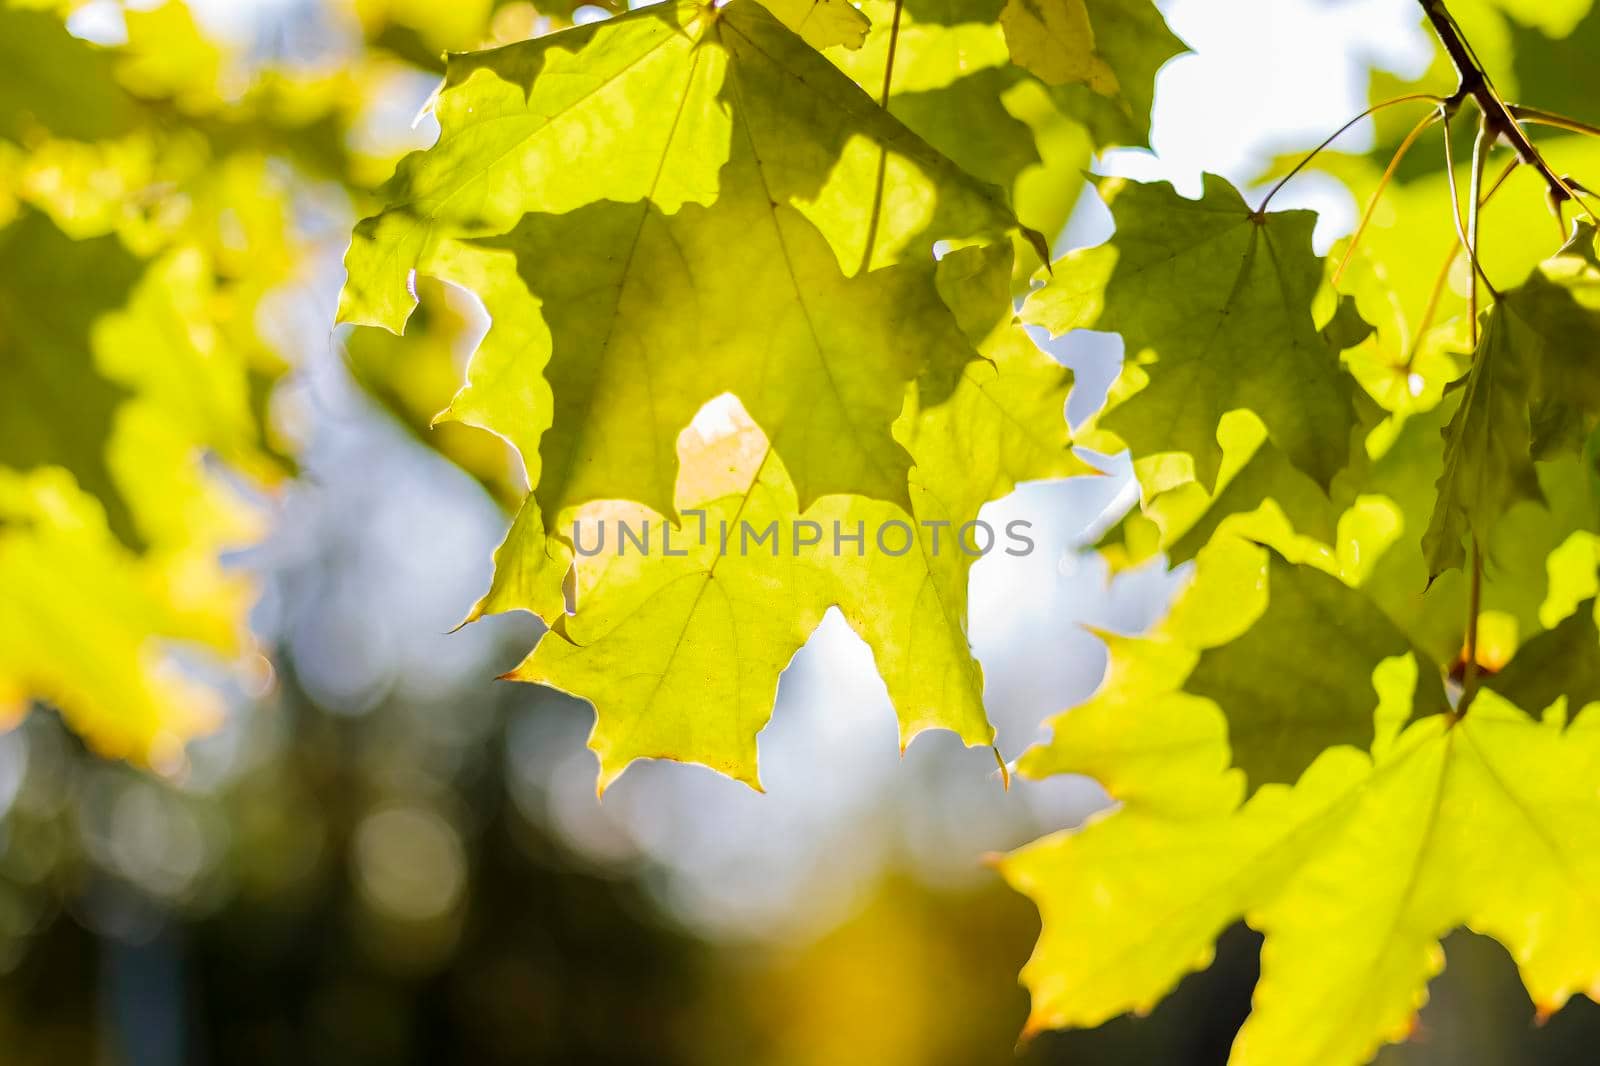 Green maple leaves against a blue sky in the autumn sunlight. In the park on a sunny day.